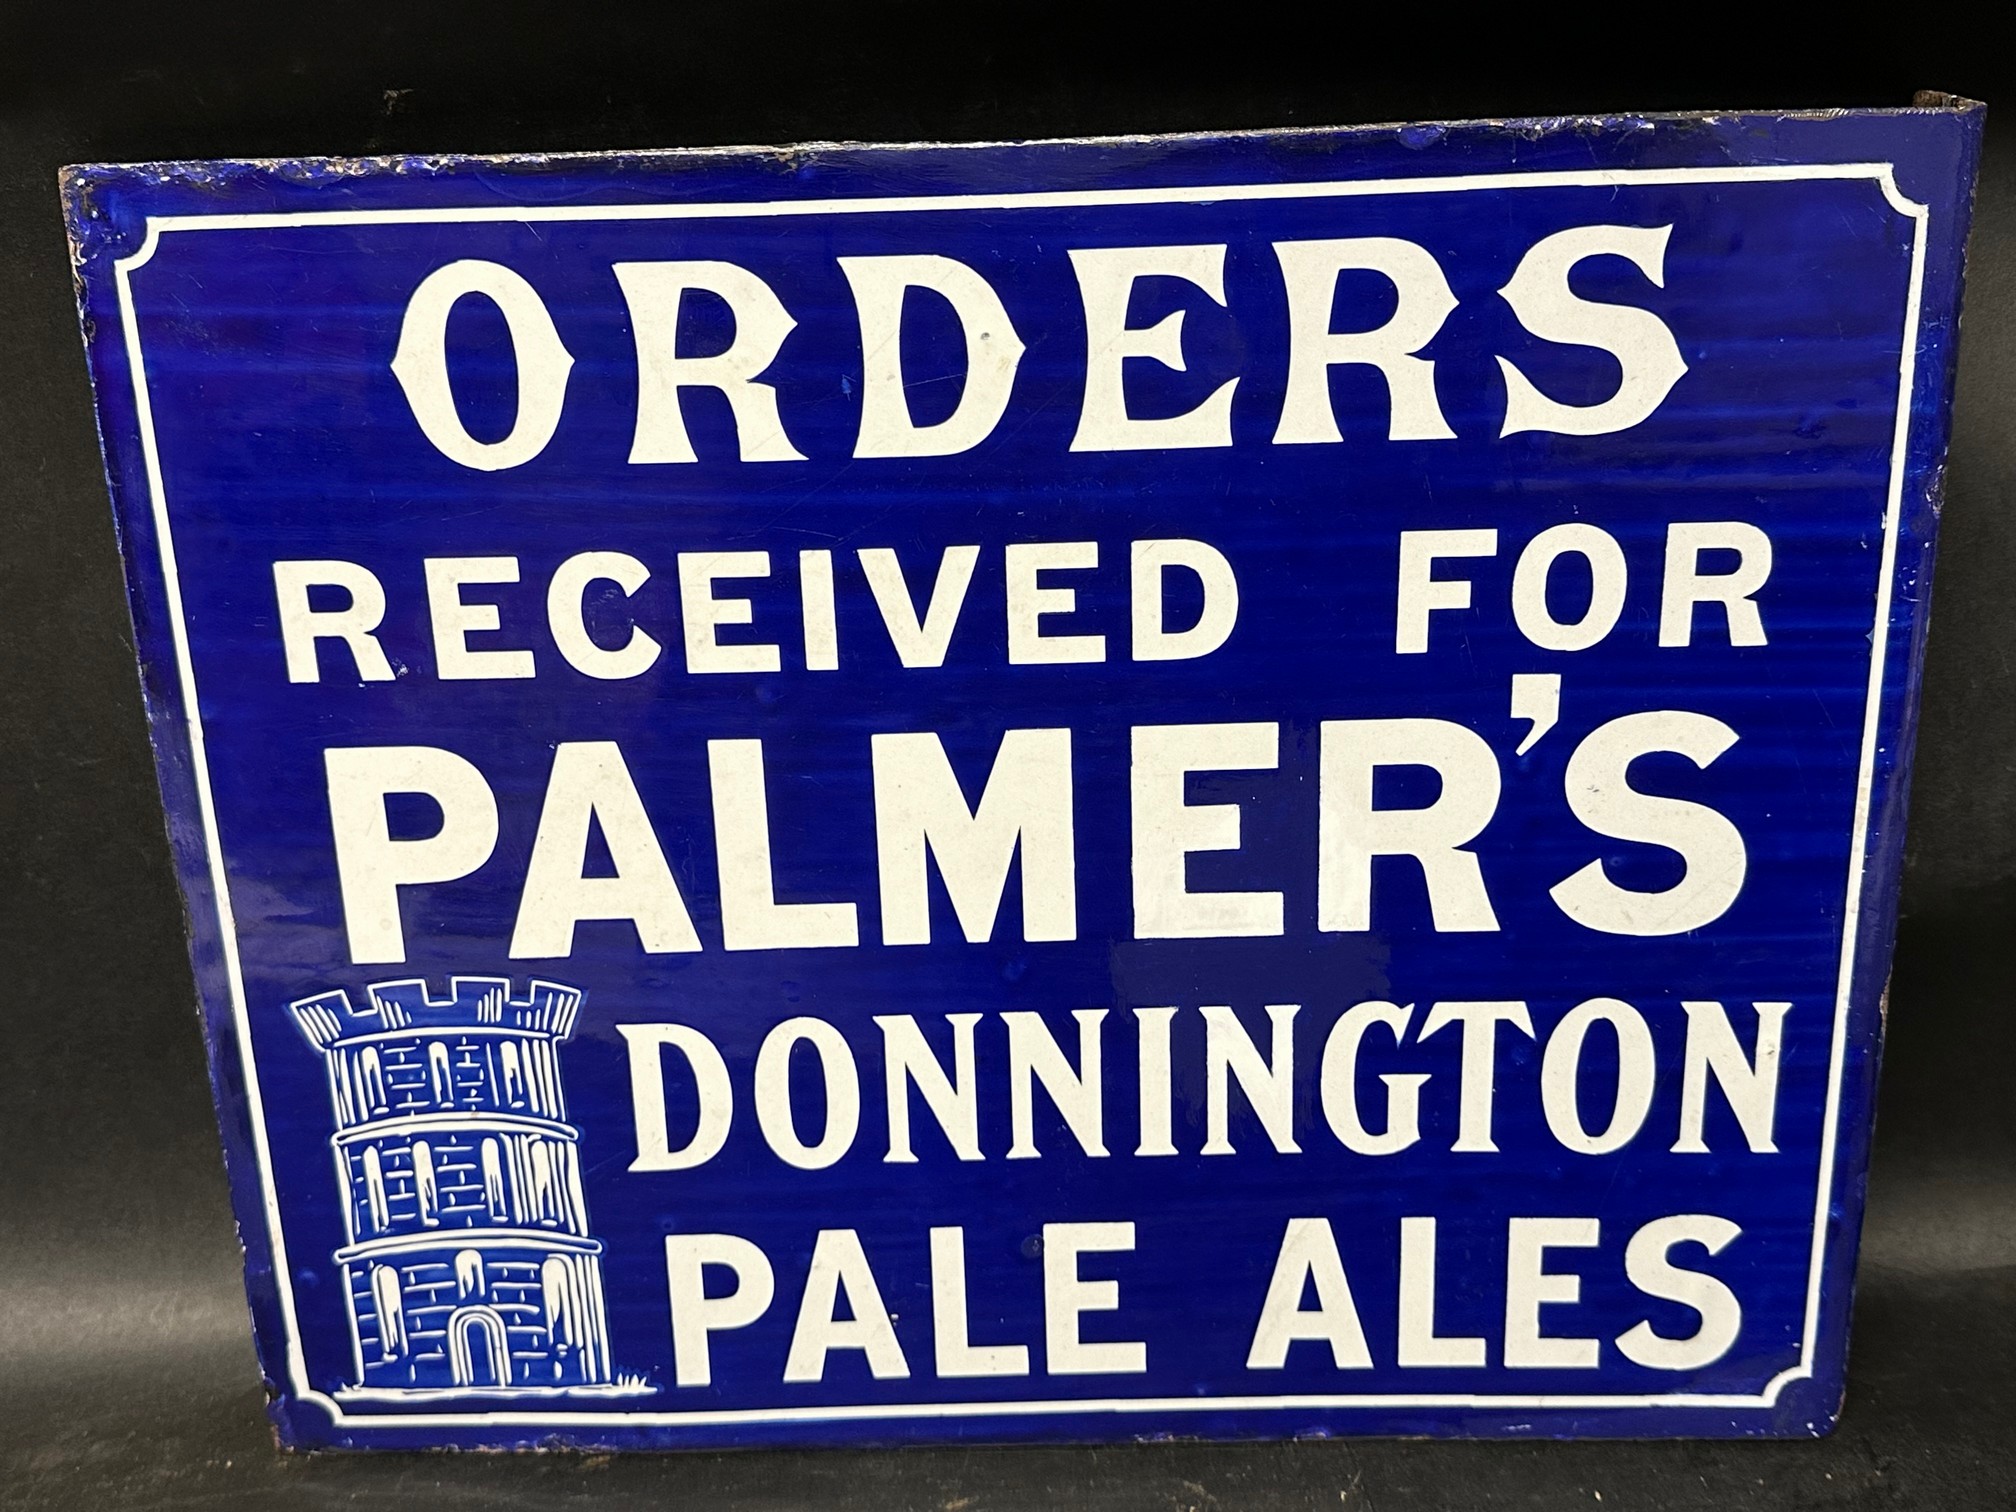 A Palmer's Donnington Pale Ales double sided enamel advertising sign with hanging flange, small - Image 8 of 14